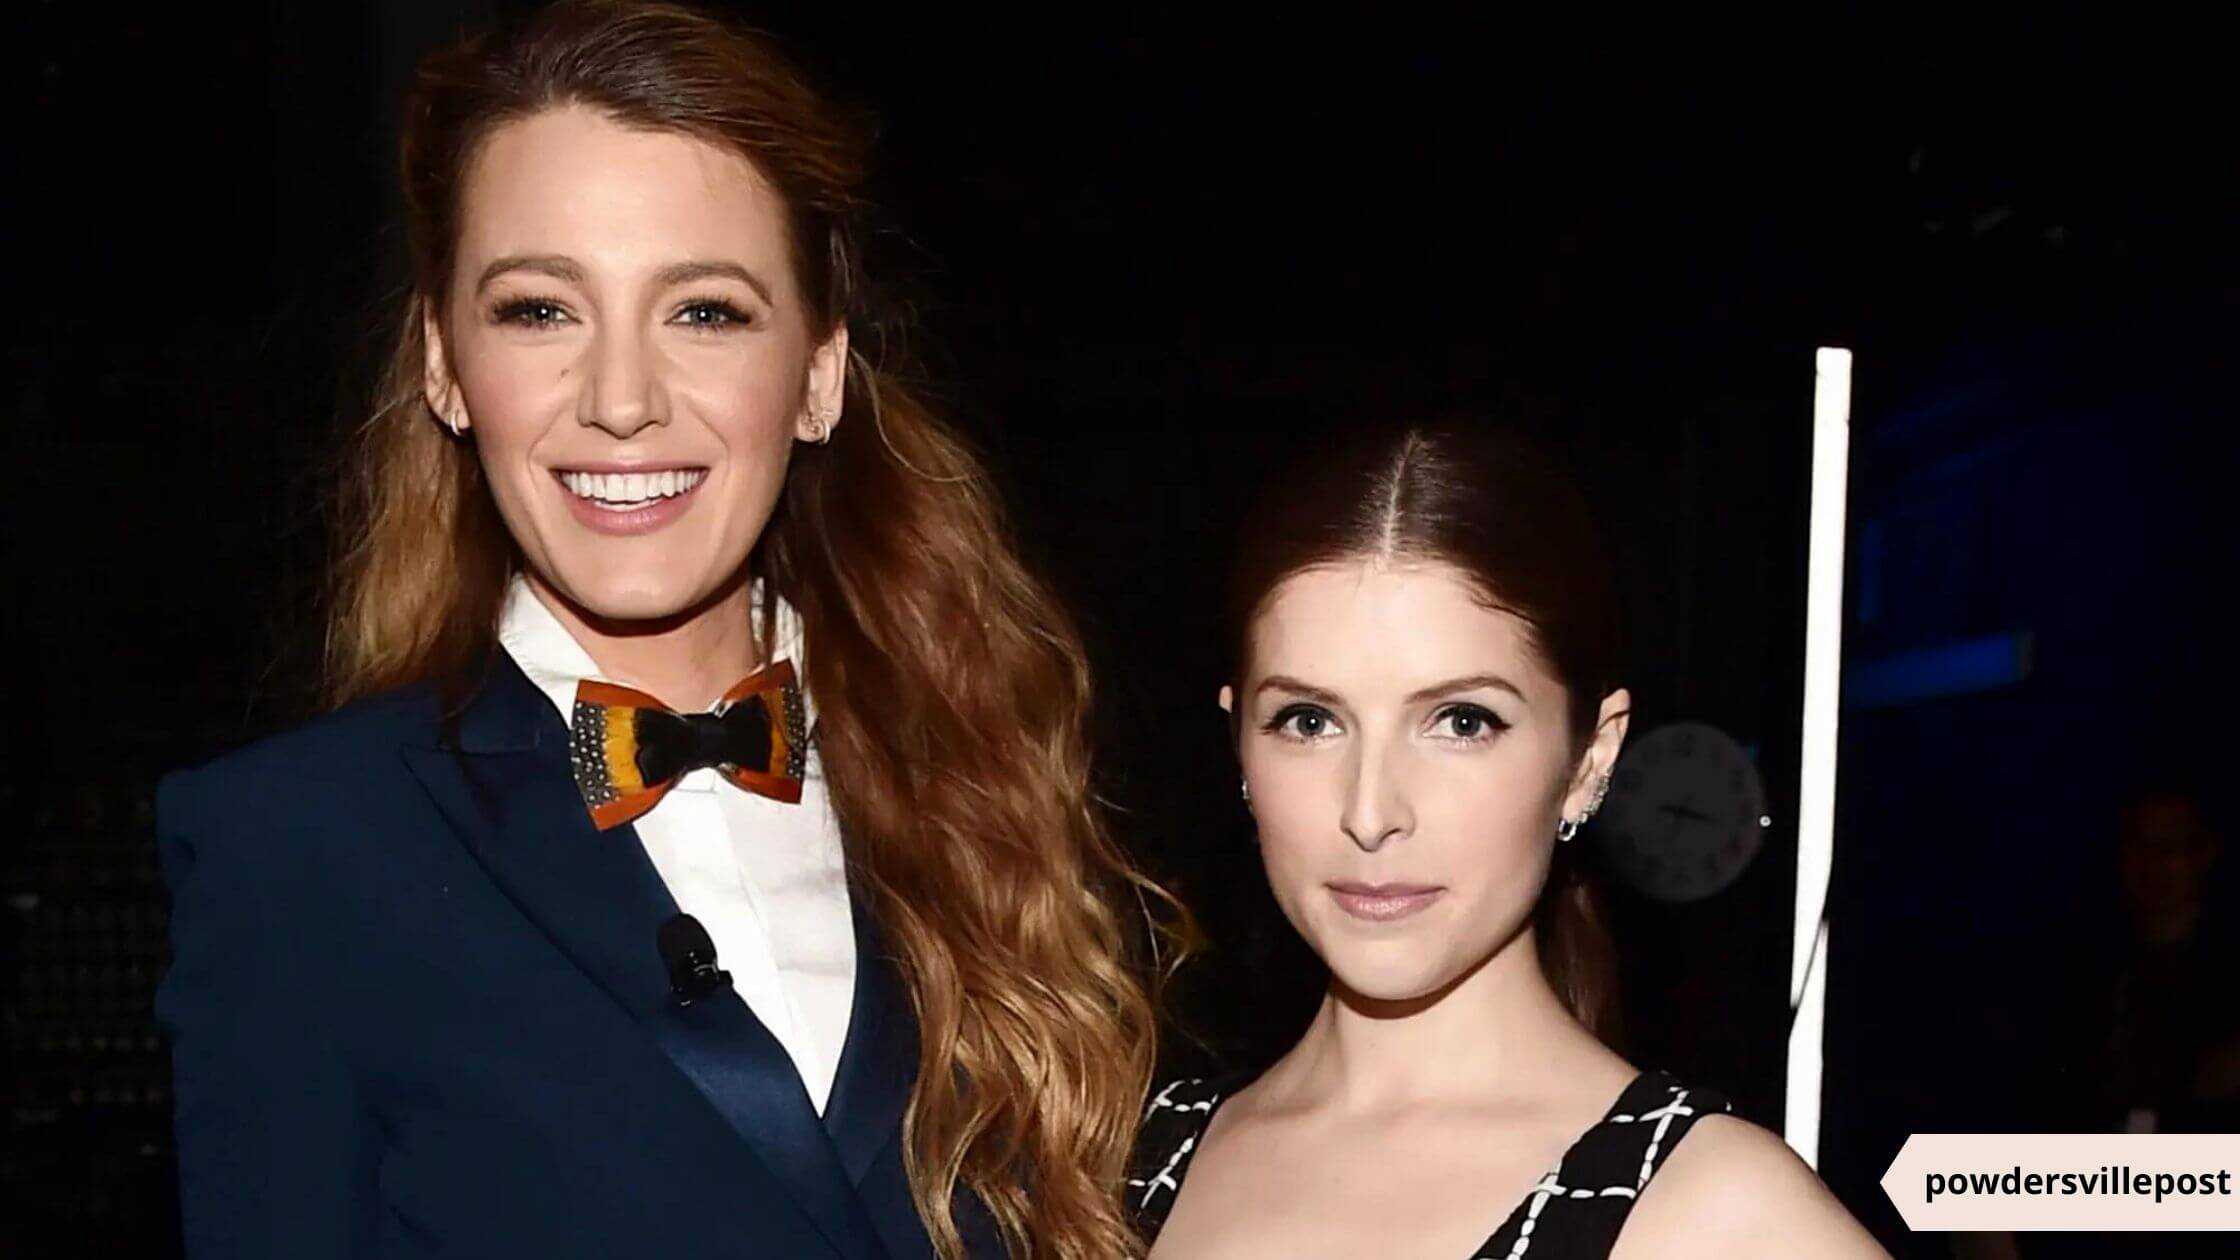 A Simple Favor Sequel Anna Kendrick And Blake Lively Are Back